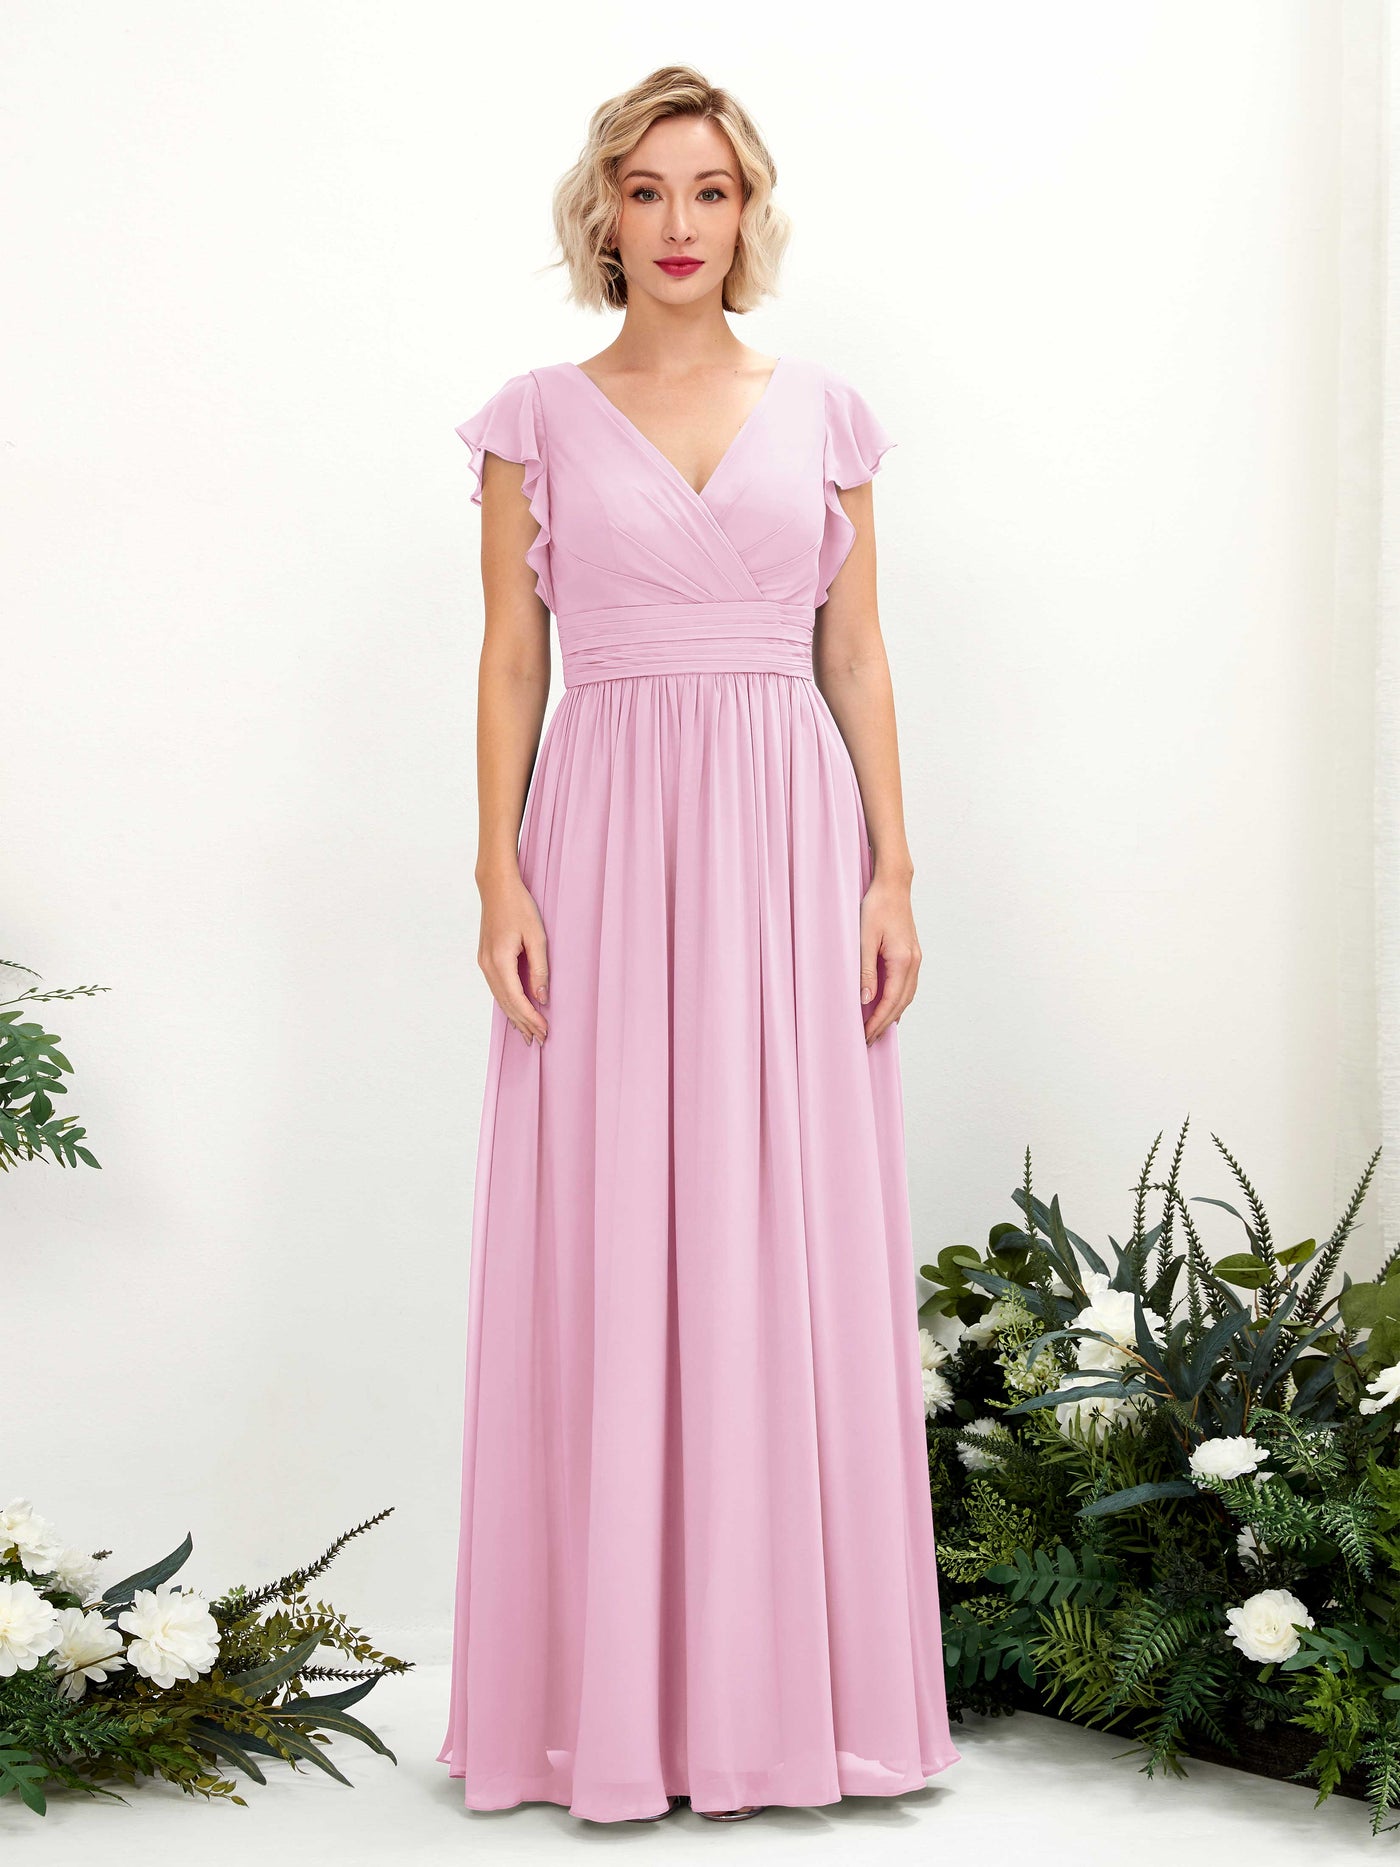 Candy Pink Bridesmaid Dresses Bridesmaid Dress A-line Chiffon V-neck Full Length Short Sleeves Wedding Party Dress (81222739)#color_candy-pink